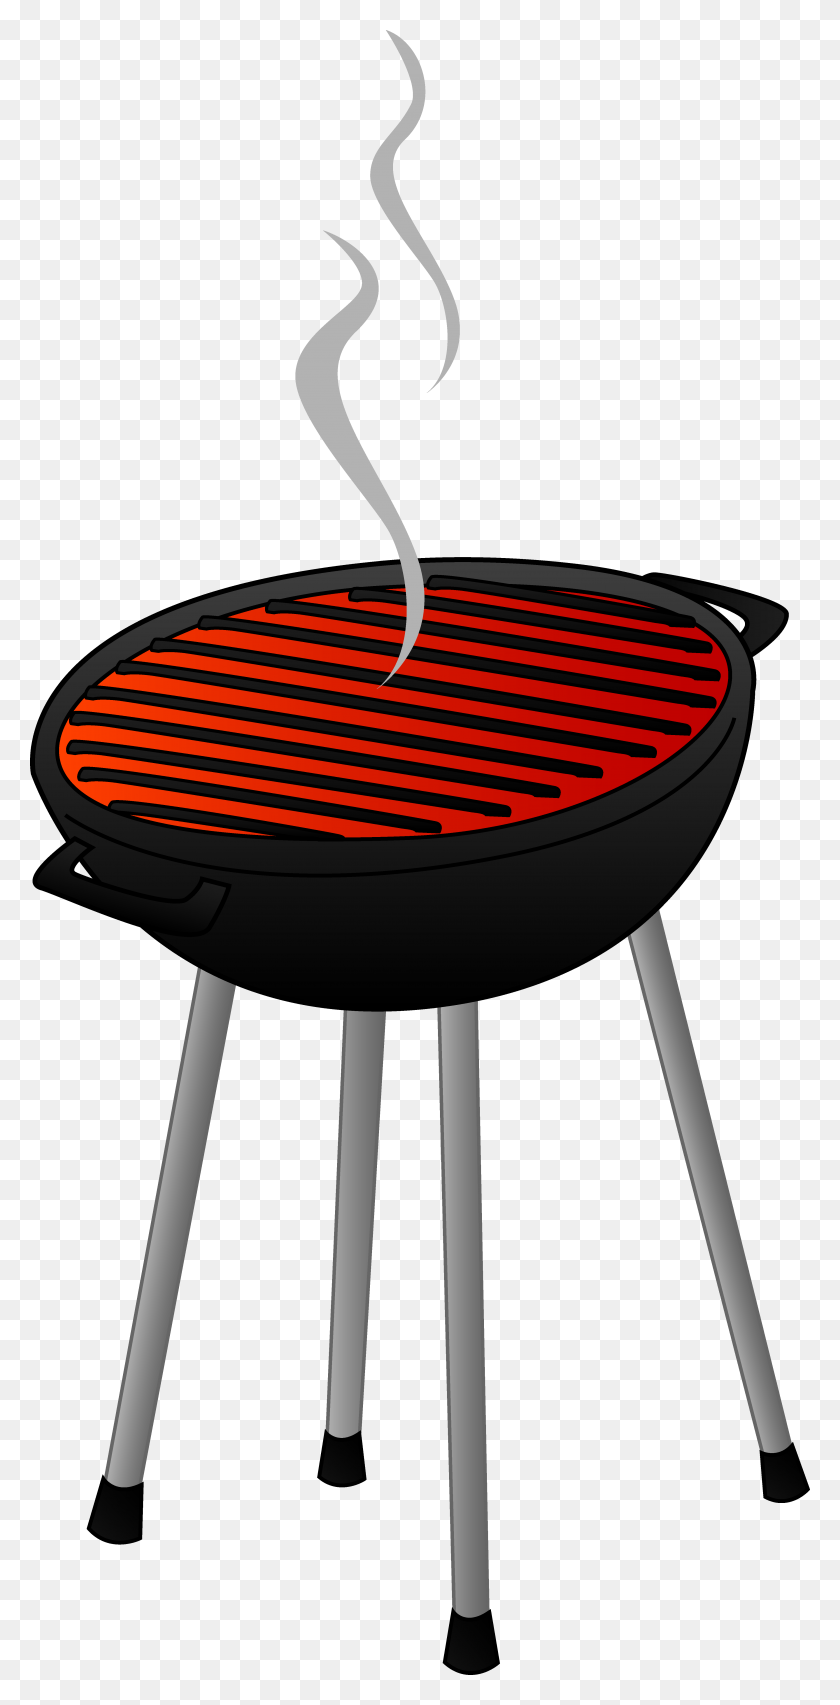 4235x8932 Bbq Clip Art Image Sewing - Man Grilling Clipart